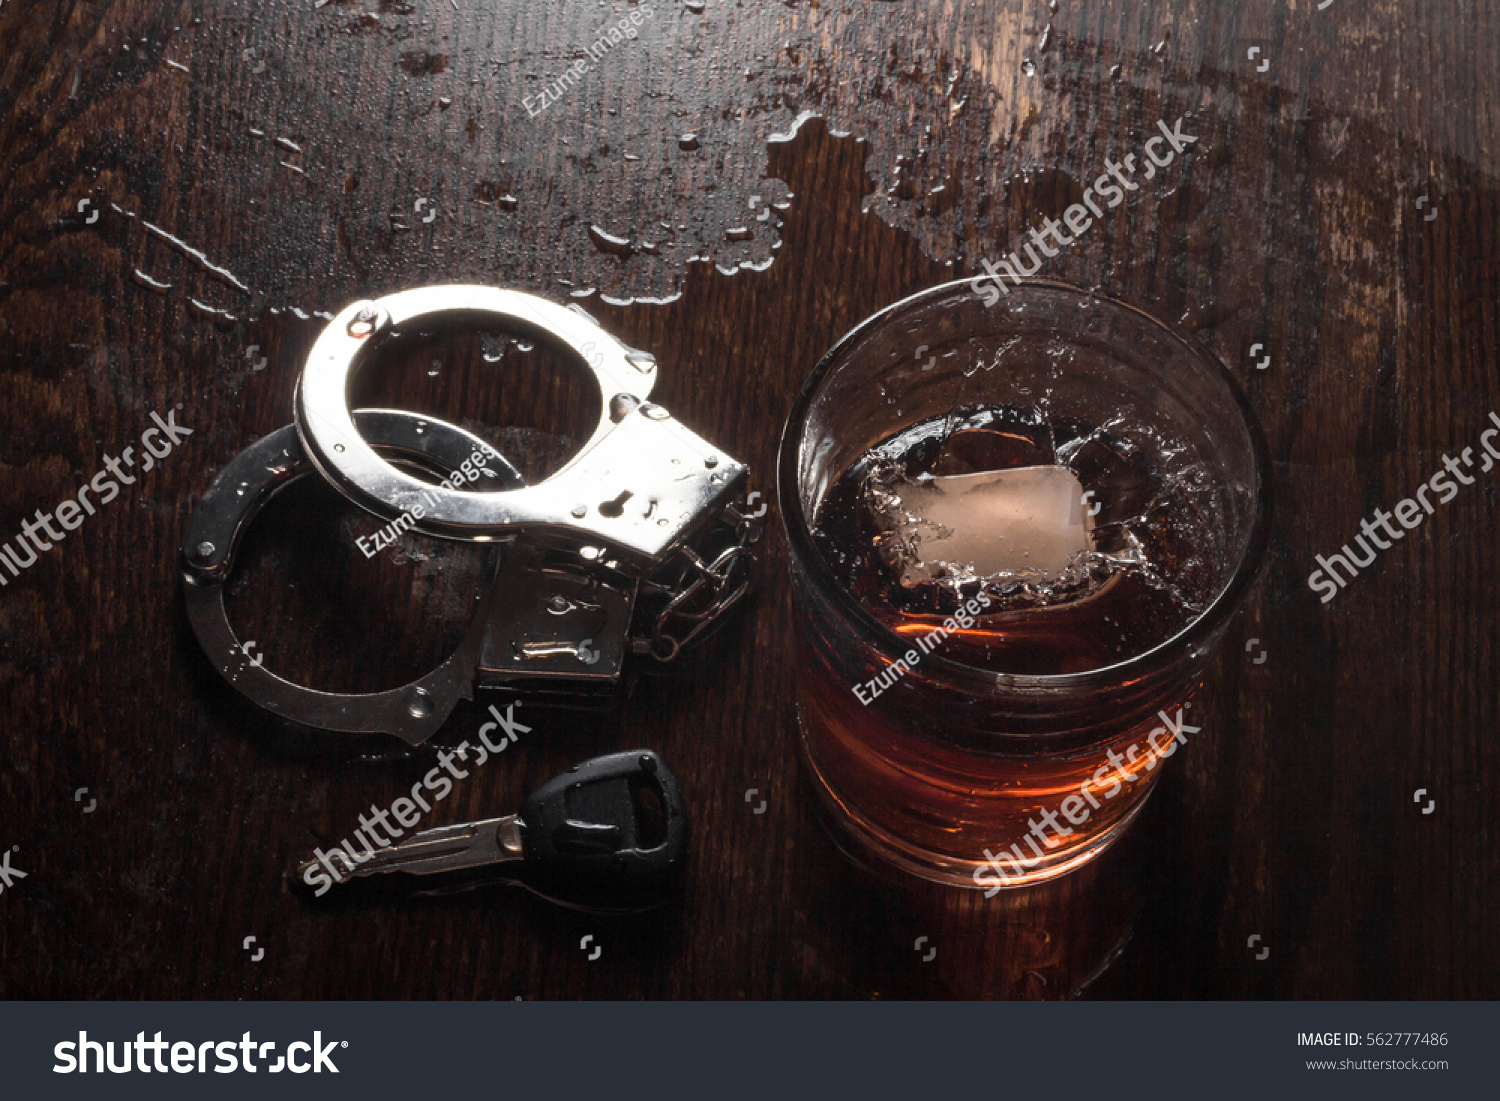 Rocks glass of whisky with handcuffs and keys symbolizing drunk driving arrest #562777486